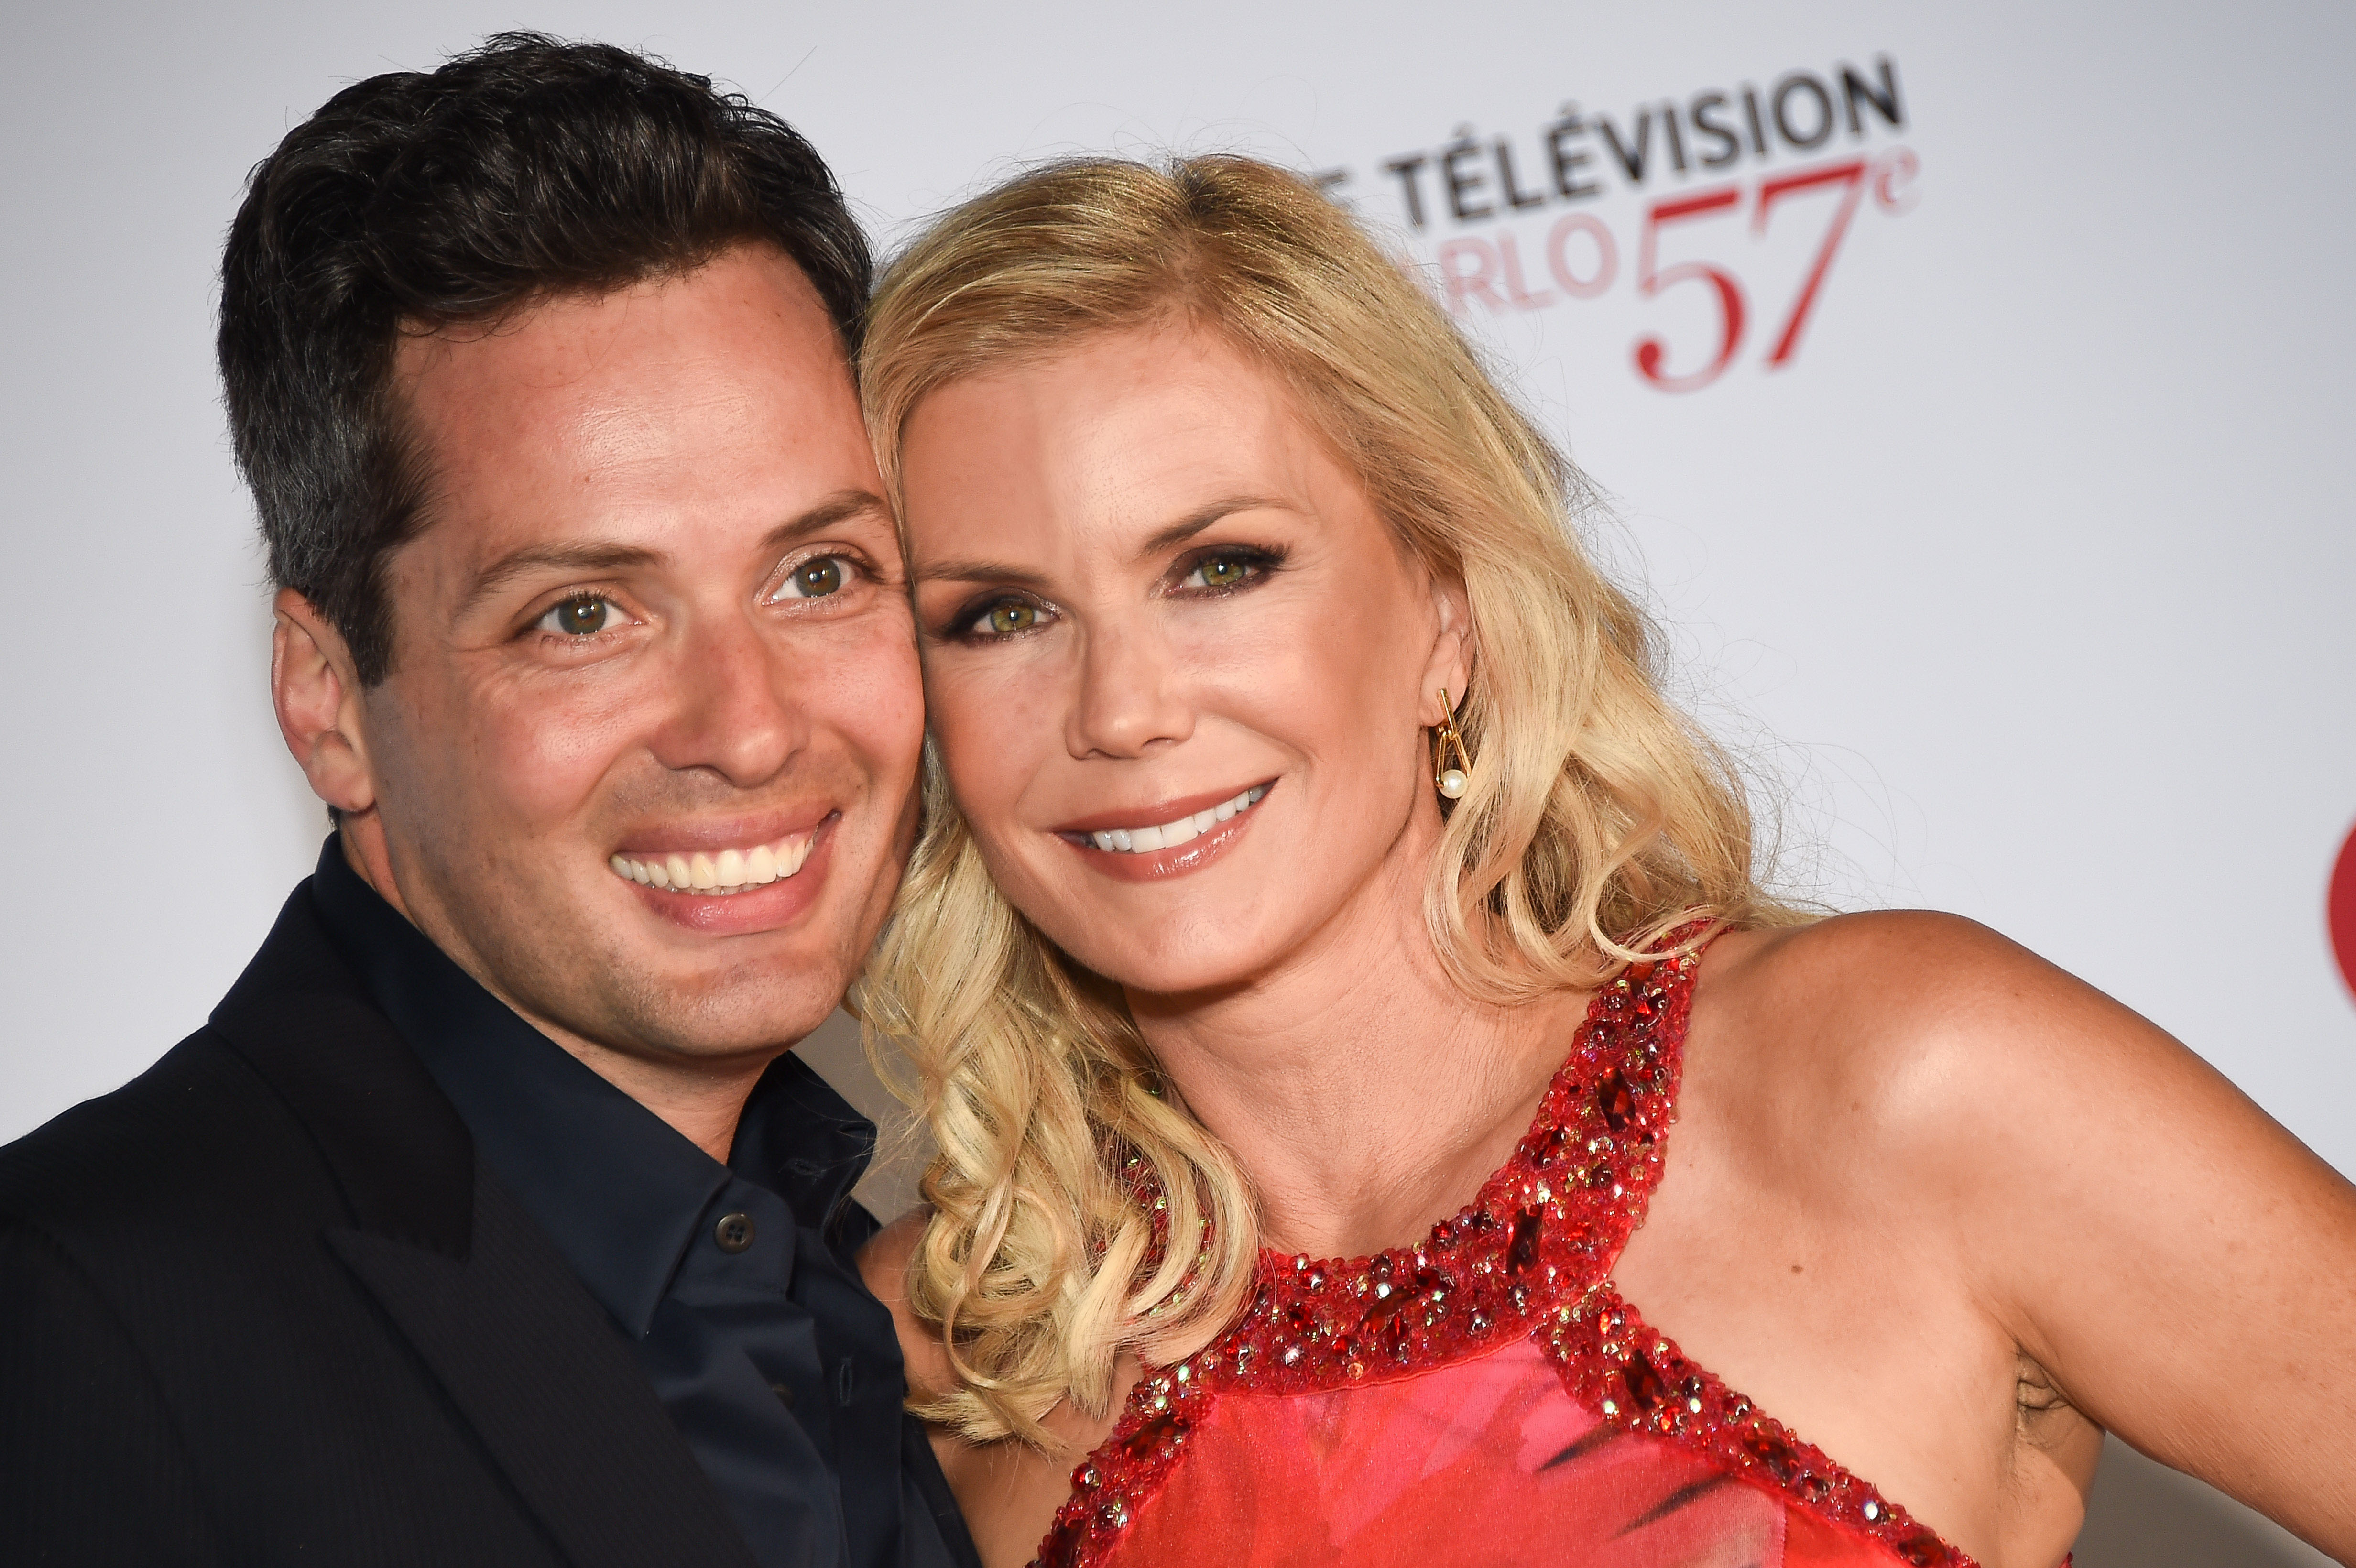 Dominique Zoida and Katherine Kelly Lang at "The Bold and The Beautiful" 30th Anniversary during the 57th Monte Carlo TV Festival on June 18, 2017, in Monte-Carlo, Monaco. | Source: Getty Images